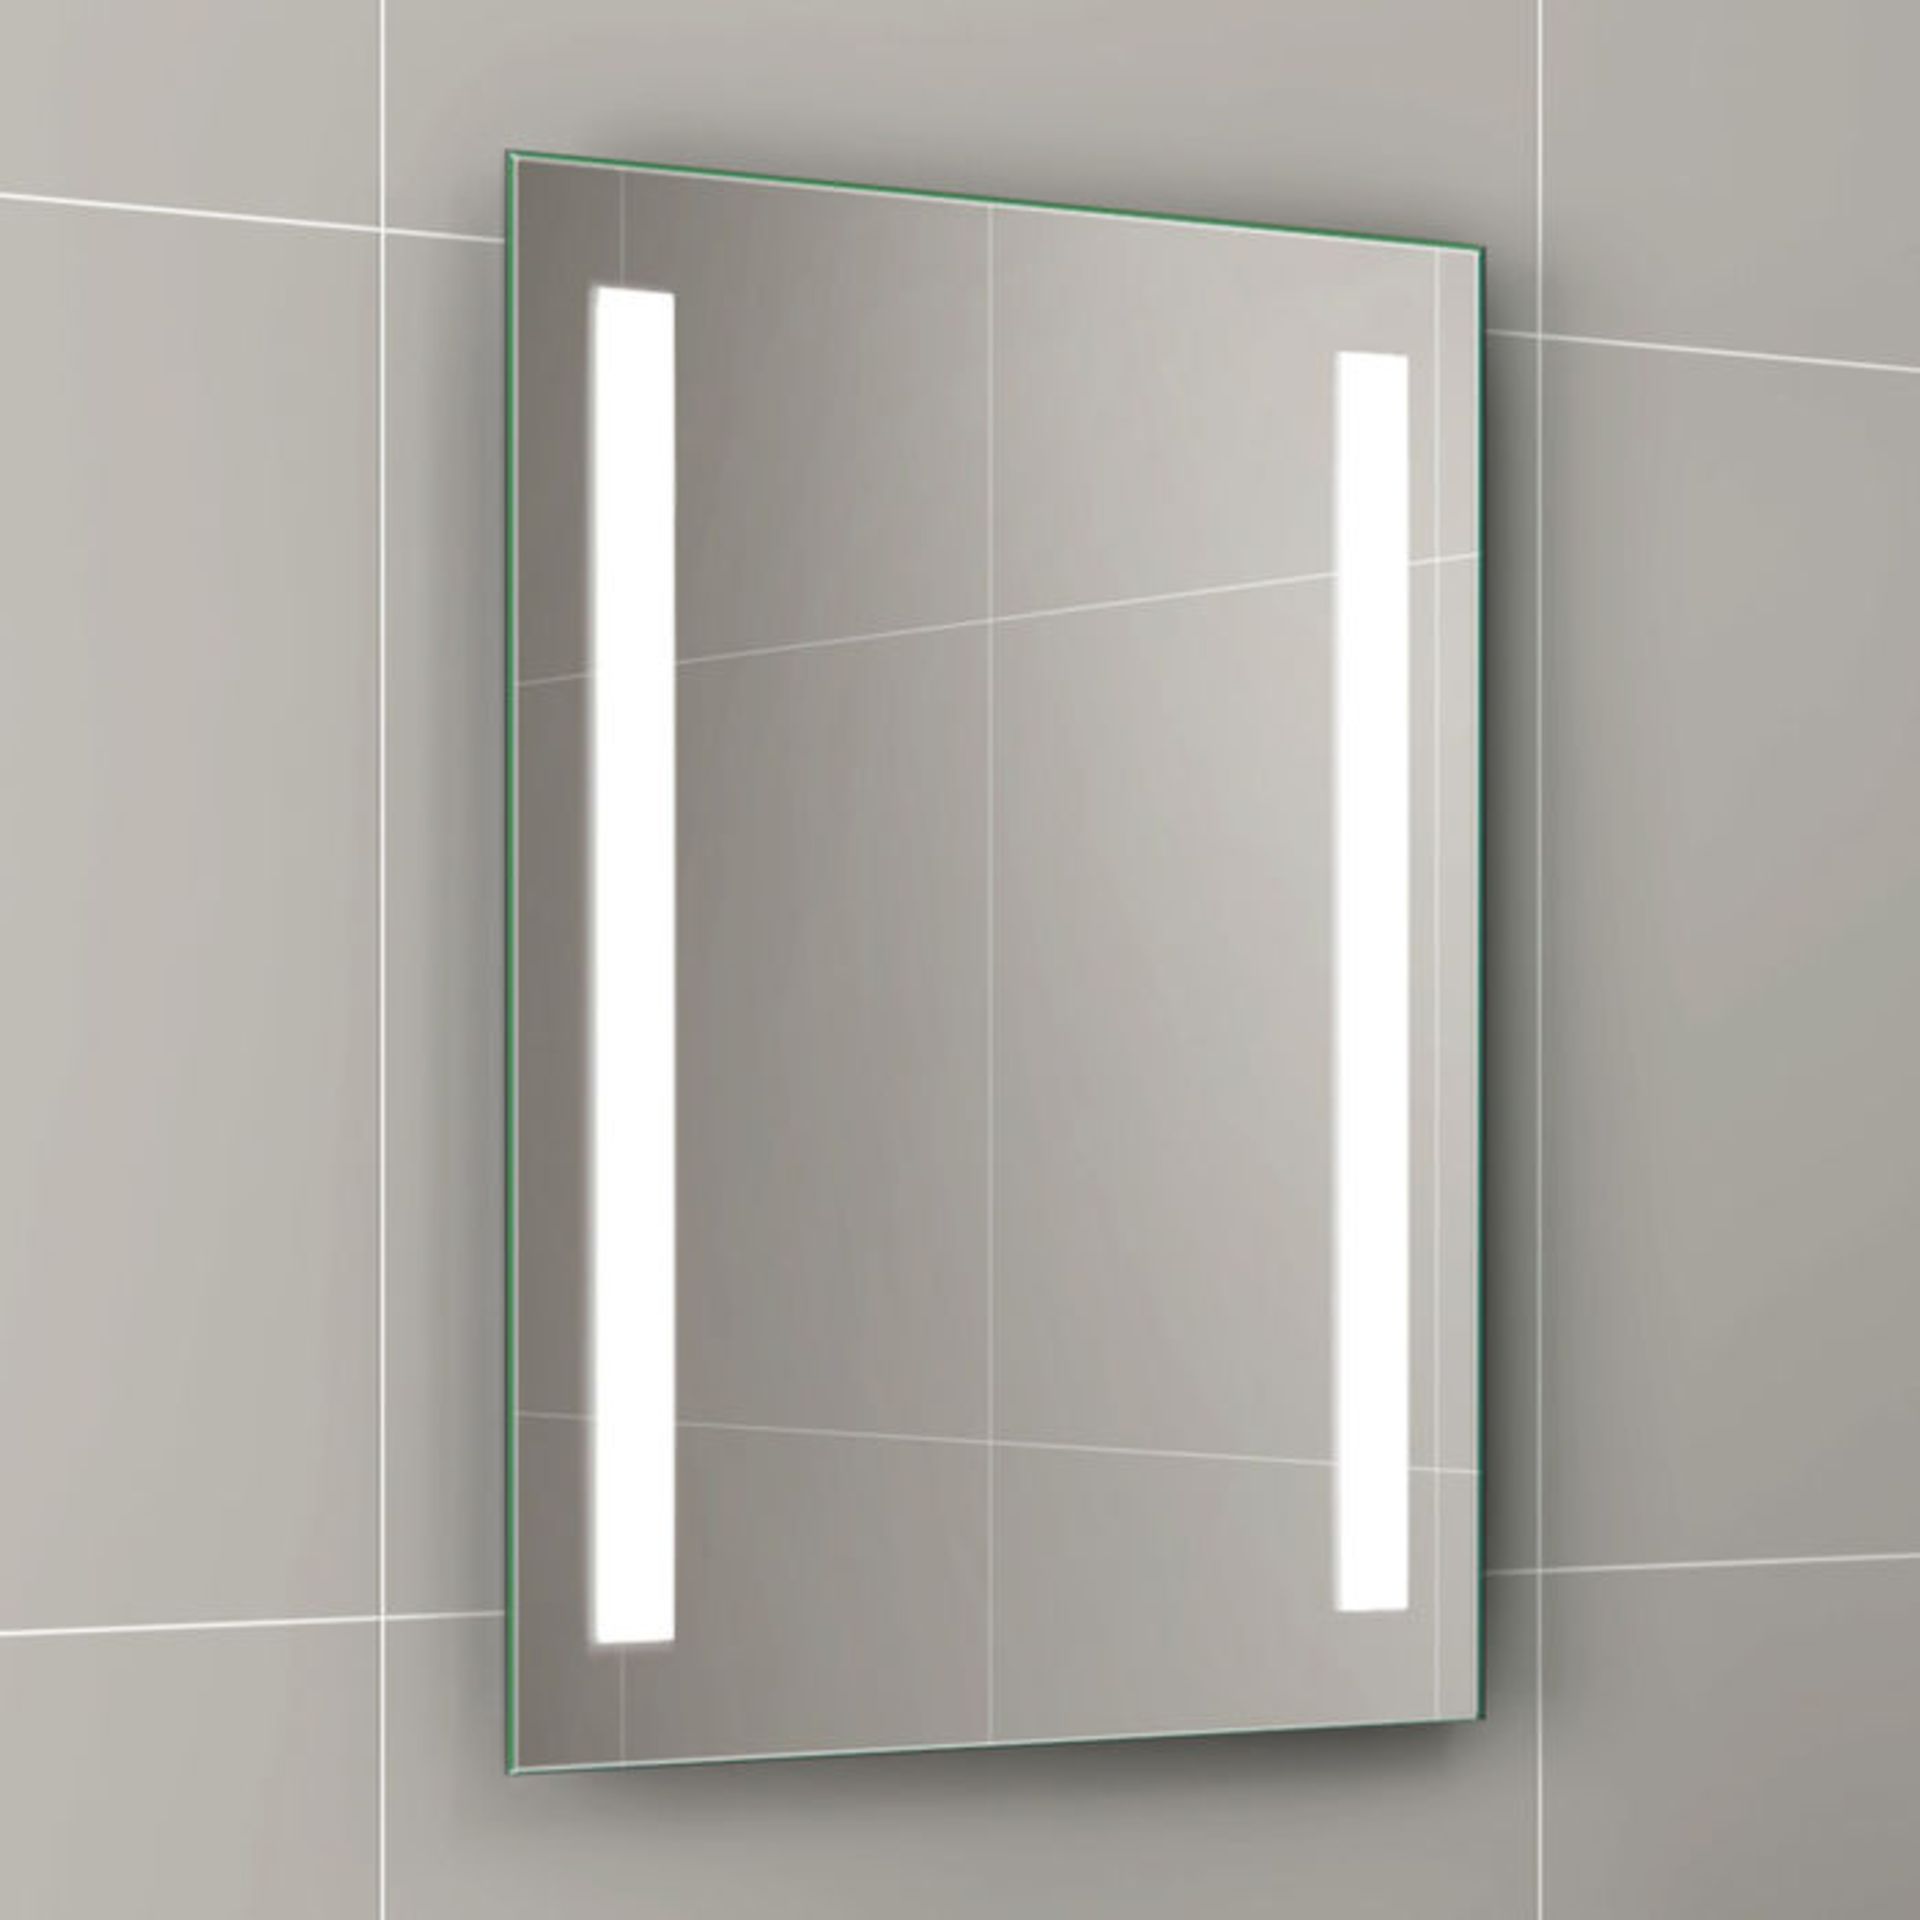 (V155) 500x700mm Omega LED Mirror - Battery Operated. Energy saving controlled On / Off switch - Bild 2 aus 3